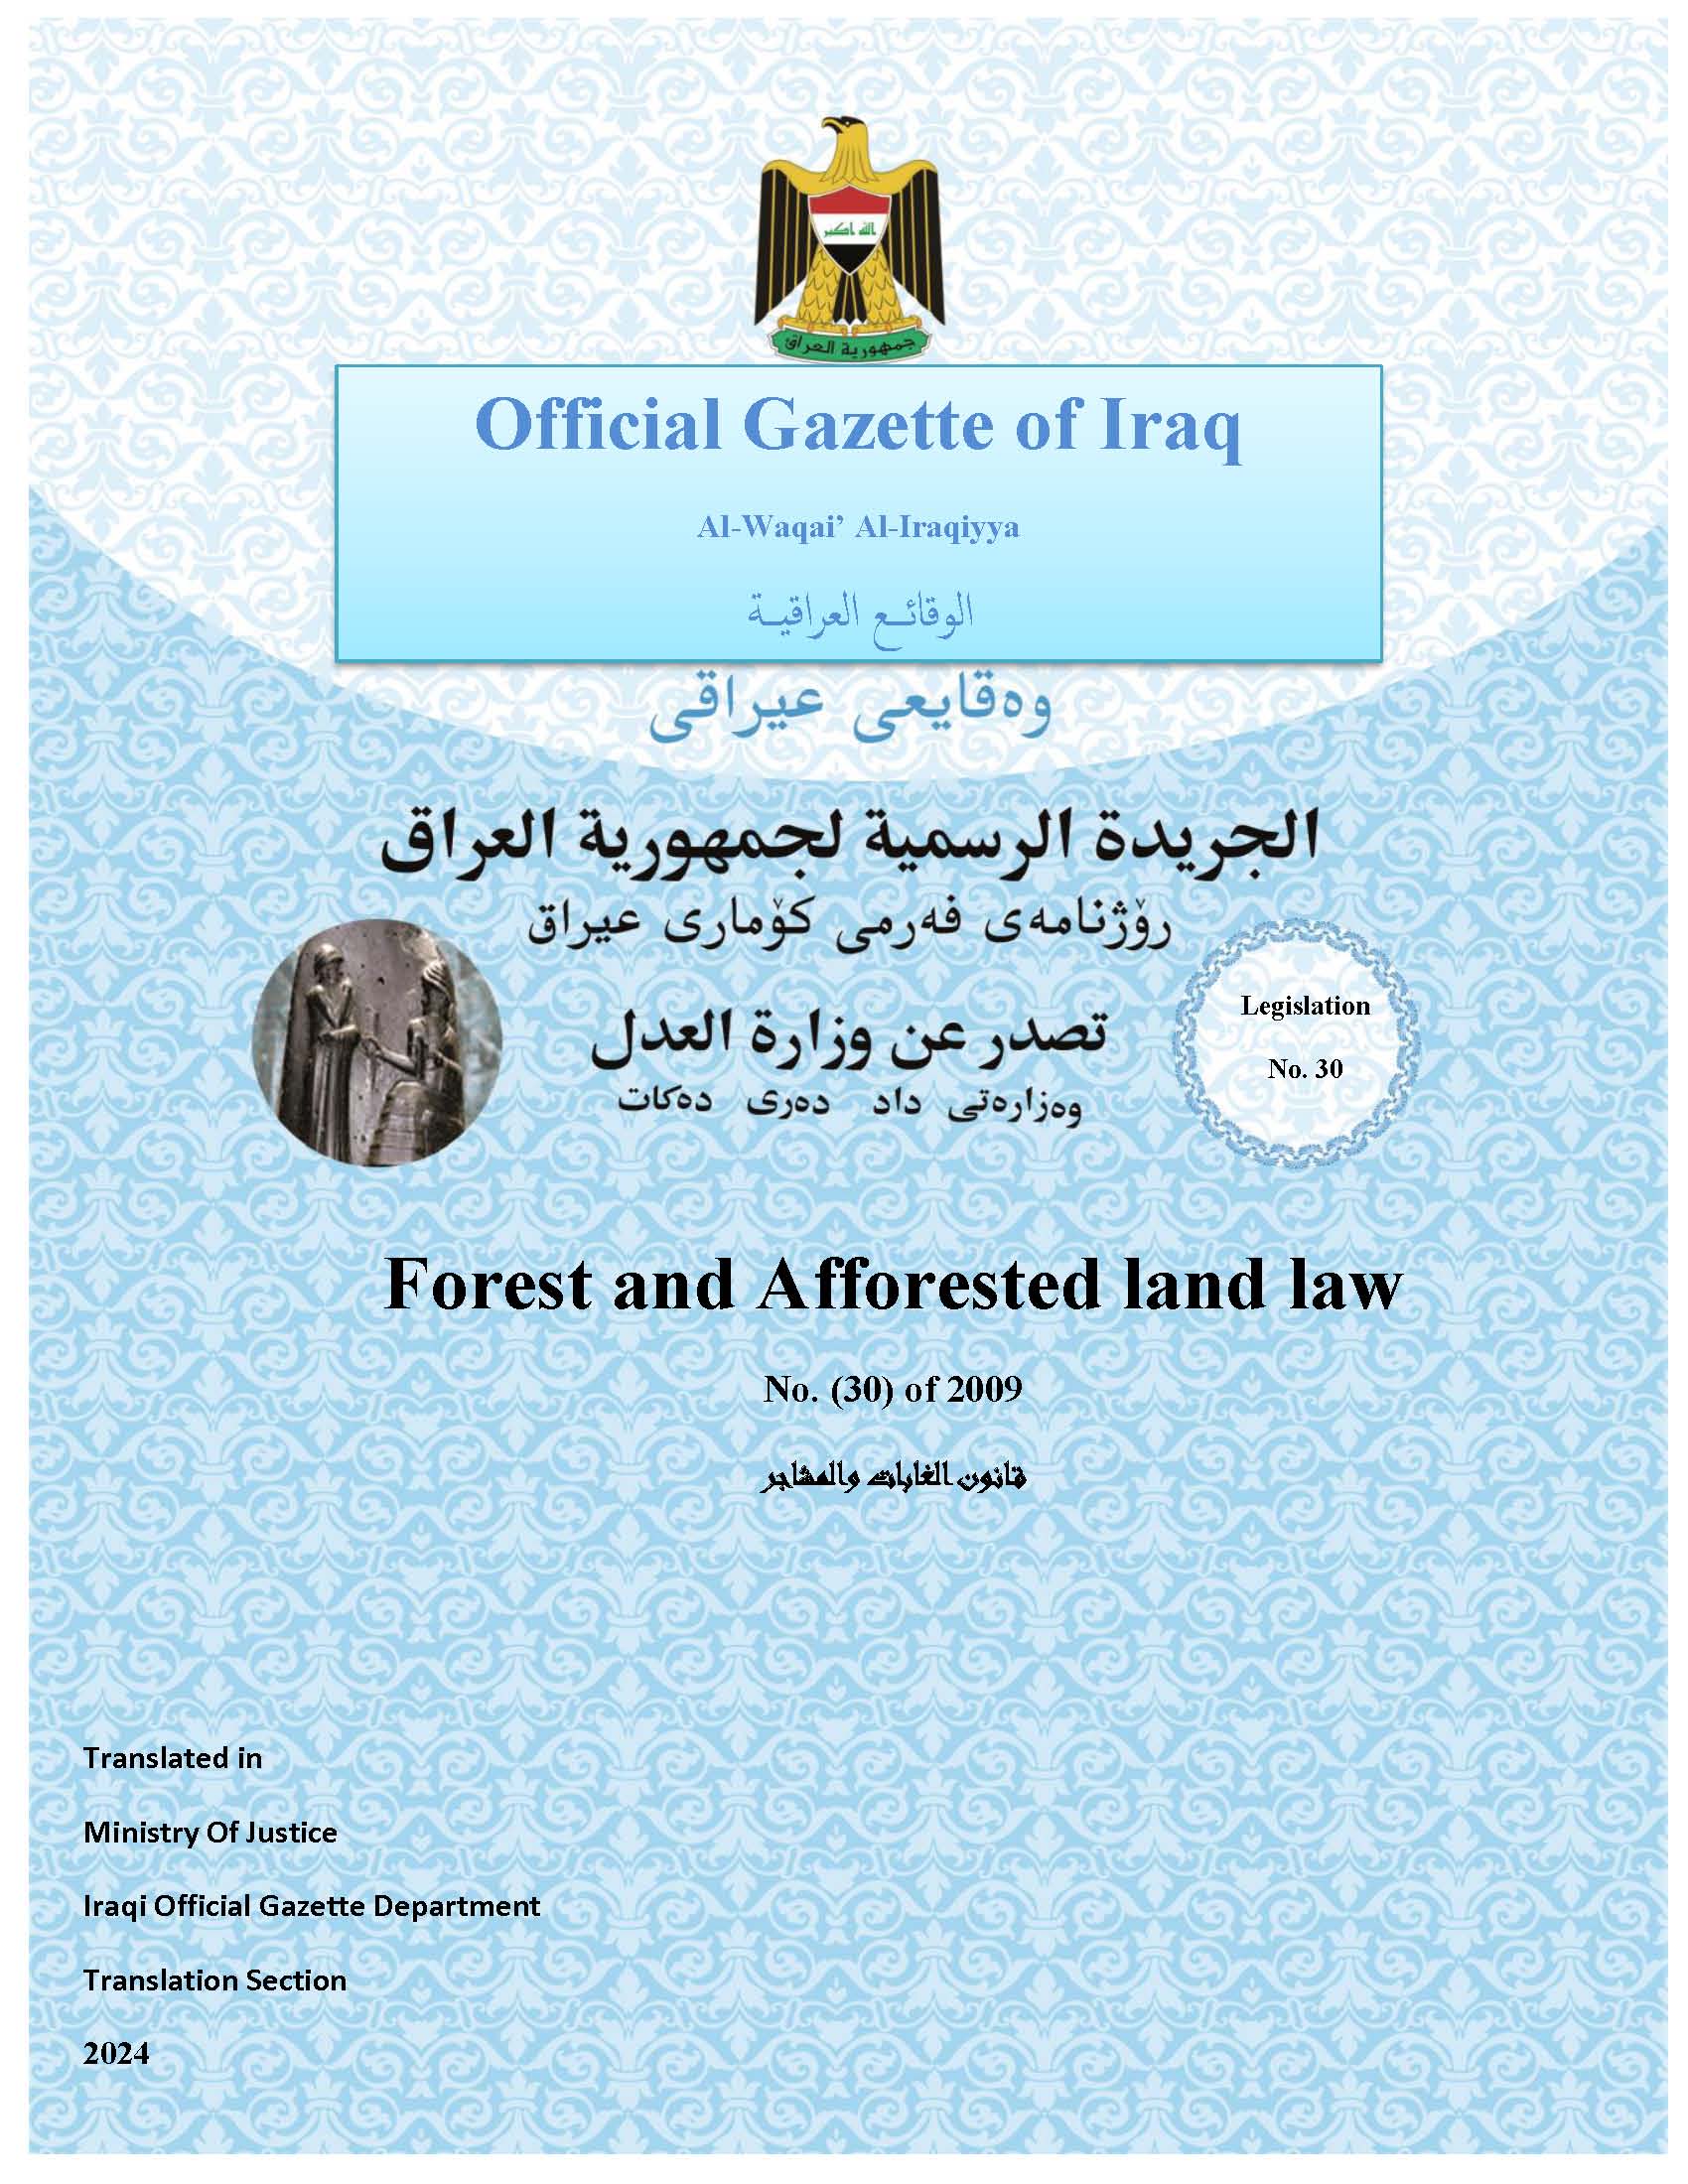 Forest and Afforested Land Law No.(30) of 2009 